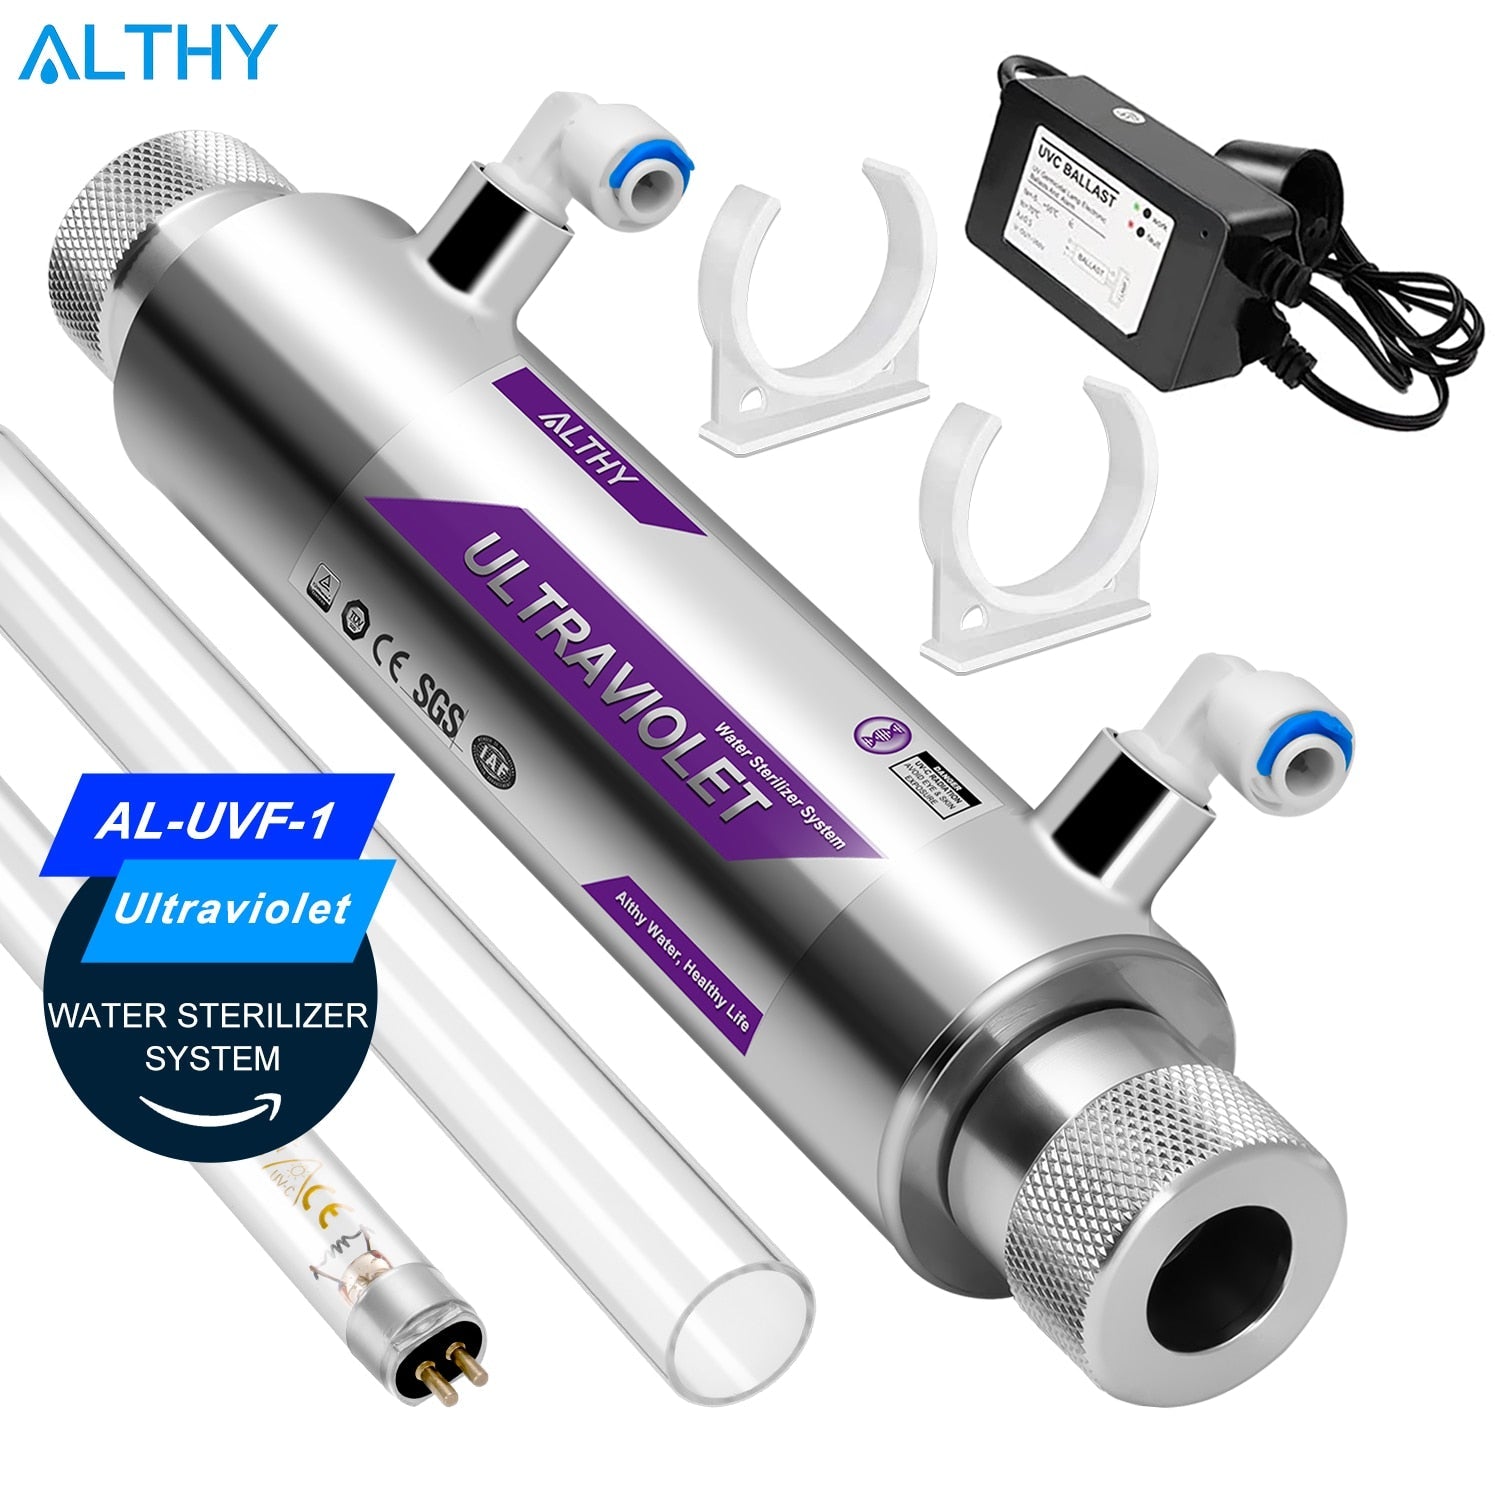 ALTHY Stainless Steel UV Water Sterilizer System Ultraviolet Tube Lamp Direct Drink Disinfection Filter Purifier 1GPM / 2GPM 1GPM-04EU220V-240V Hardware > Plumbing > Water Dispensing & Filtration 334.99 EZYSELLA SHOP